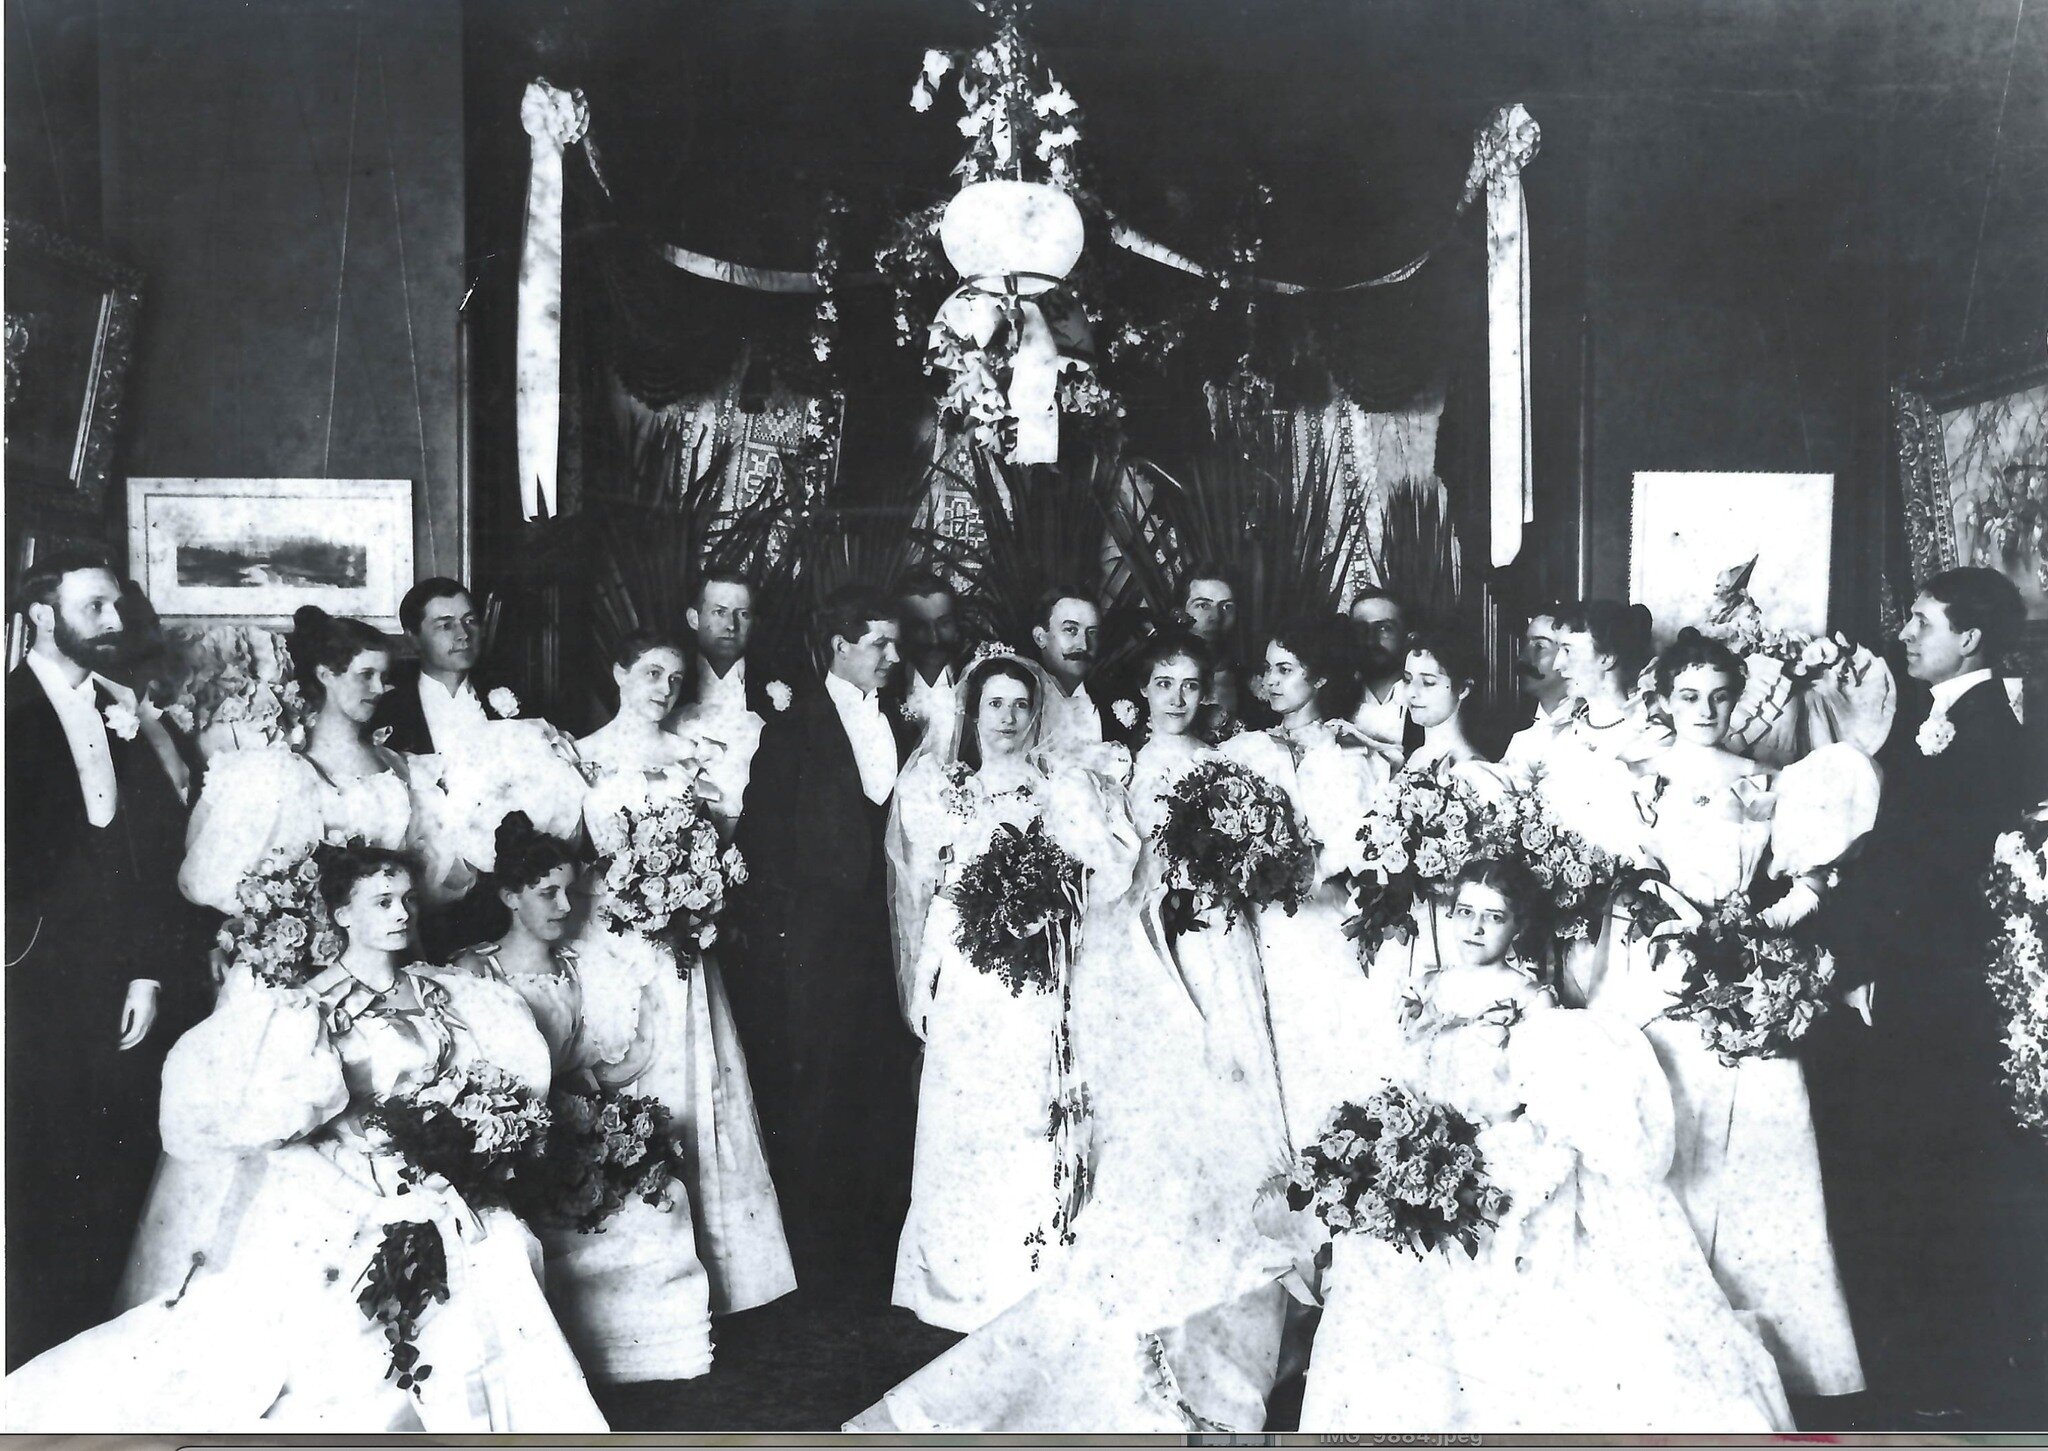 CAN YOU HELP WITH OUR MYSTERY PHOTO? This wedding photograph is an unusual image from our collection that caught our attention. Other than a date of 1920, no information is available regarding whose wedding this was or where it occurred. We would gre